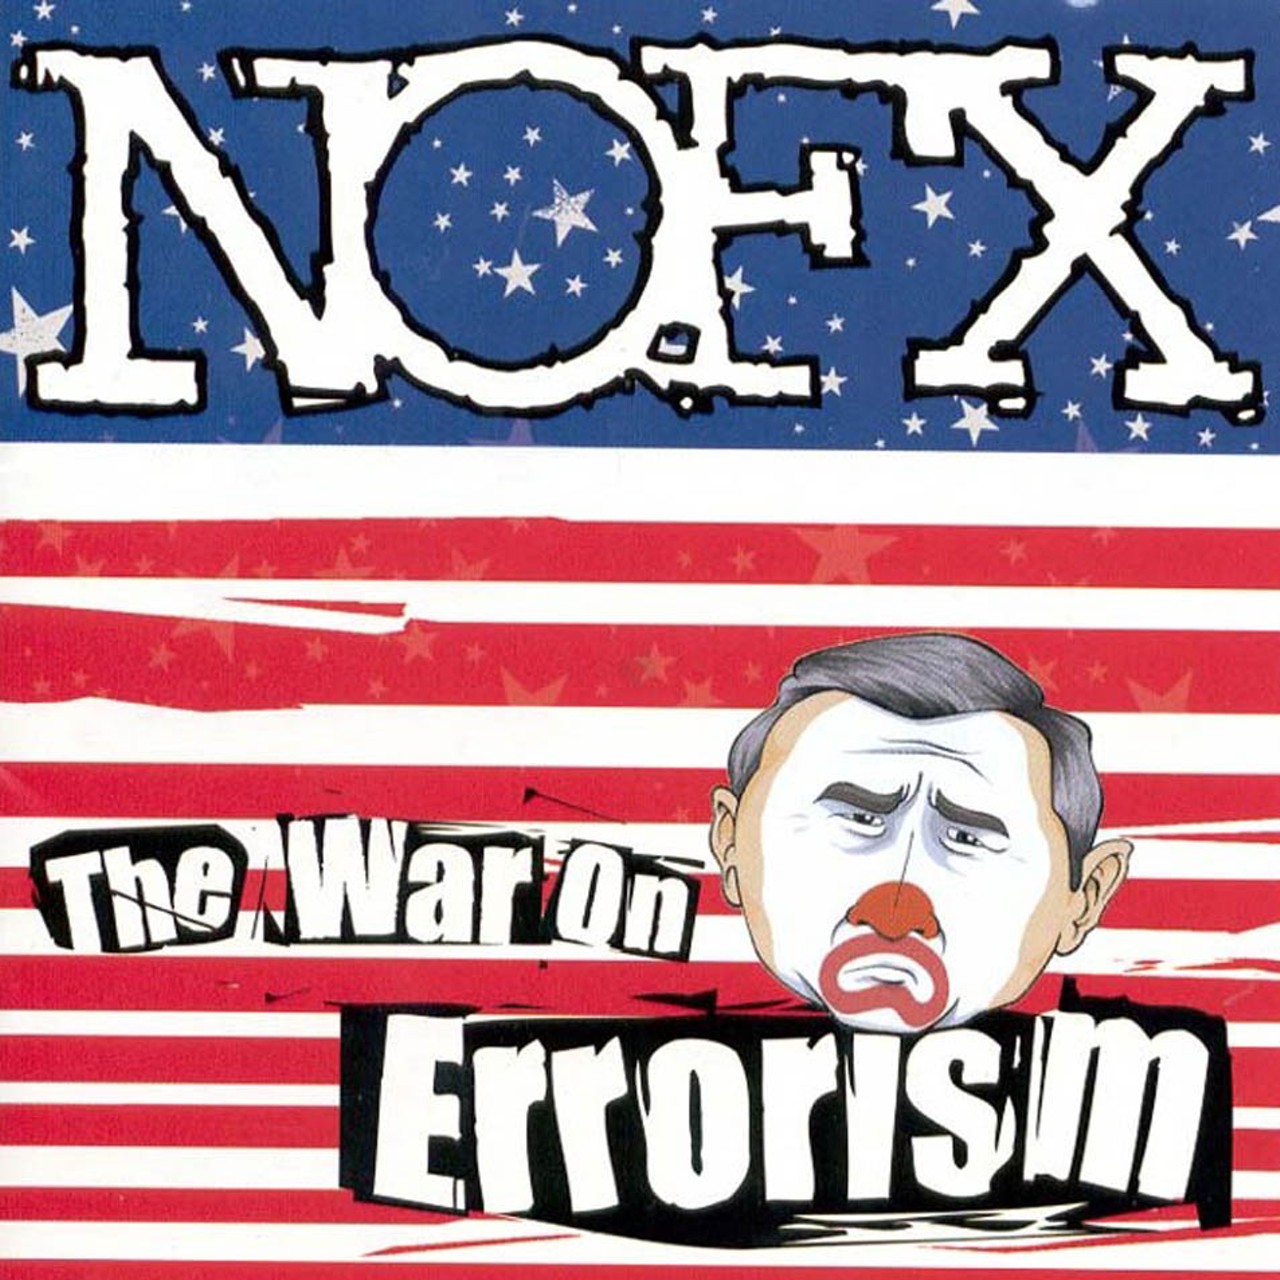 NOFX - War on Errorism (2003)
A quick glance at this album cover is enough to reveal NOFX's opinion of George Bush. Decked out in clown paint with a flag background, it's pretty unmistakable the band wasn't into the former president. Amazingly, the record still picked up a some radio play with its single, "Franco Un-American," and was even featured on an episode of One Tree Hill when one of the characters read aloud lines from "Re-gaining Unconsciousness."